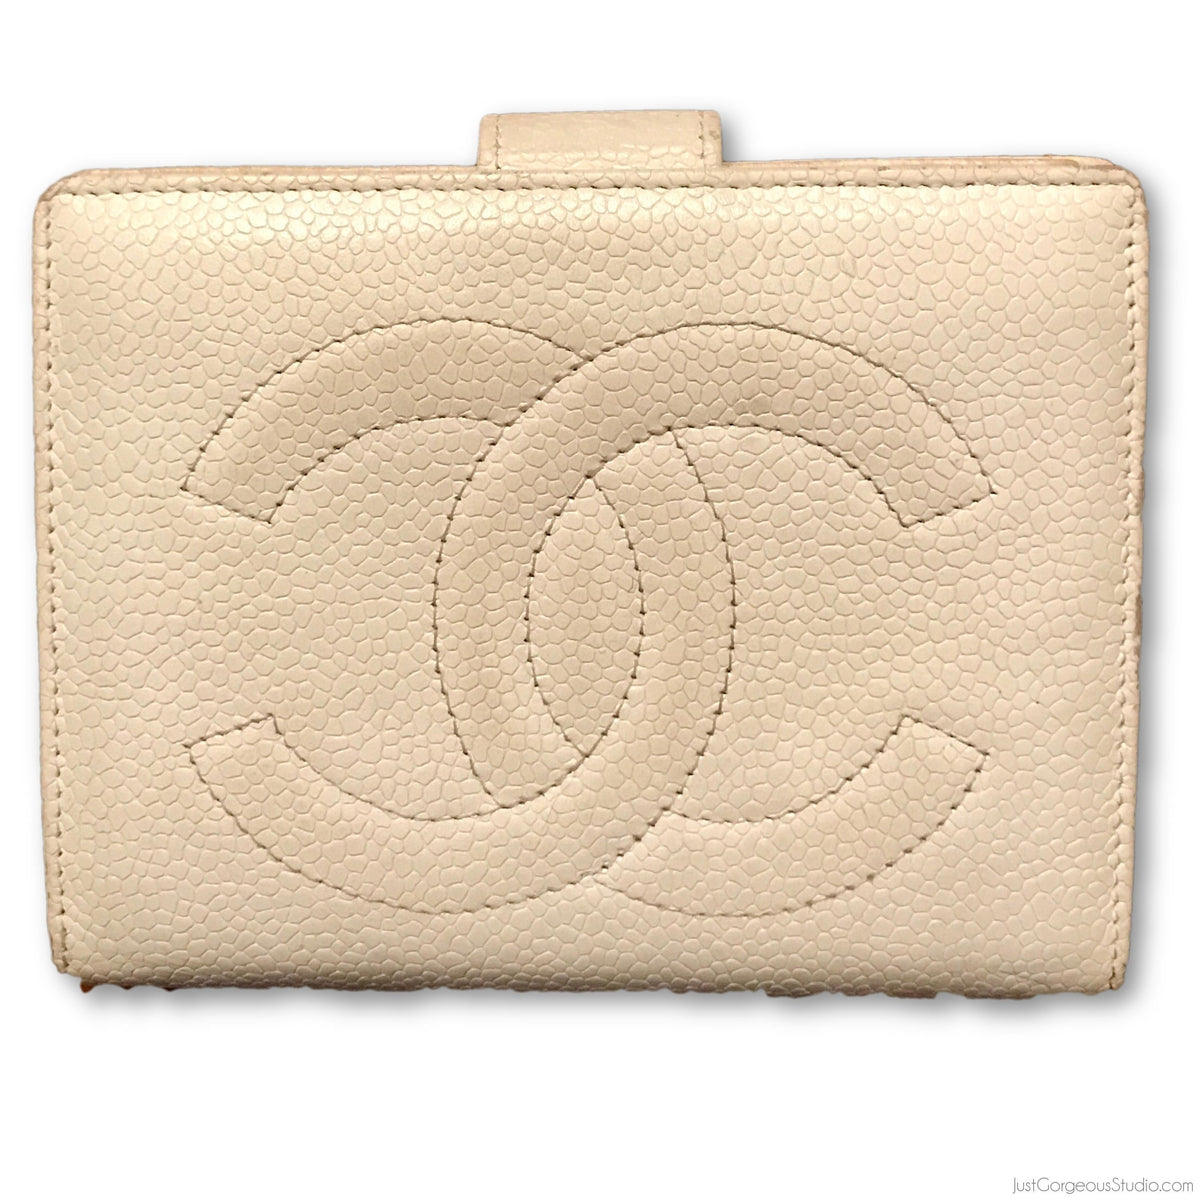 CHANEL Caviar Quilted Zip Around Coin Purse Ivory, FASHIONPHILE